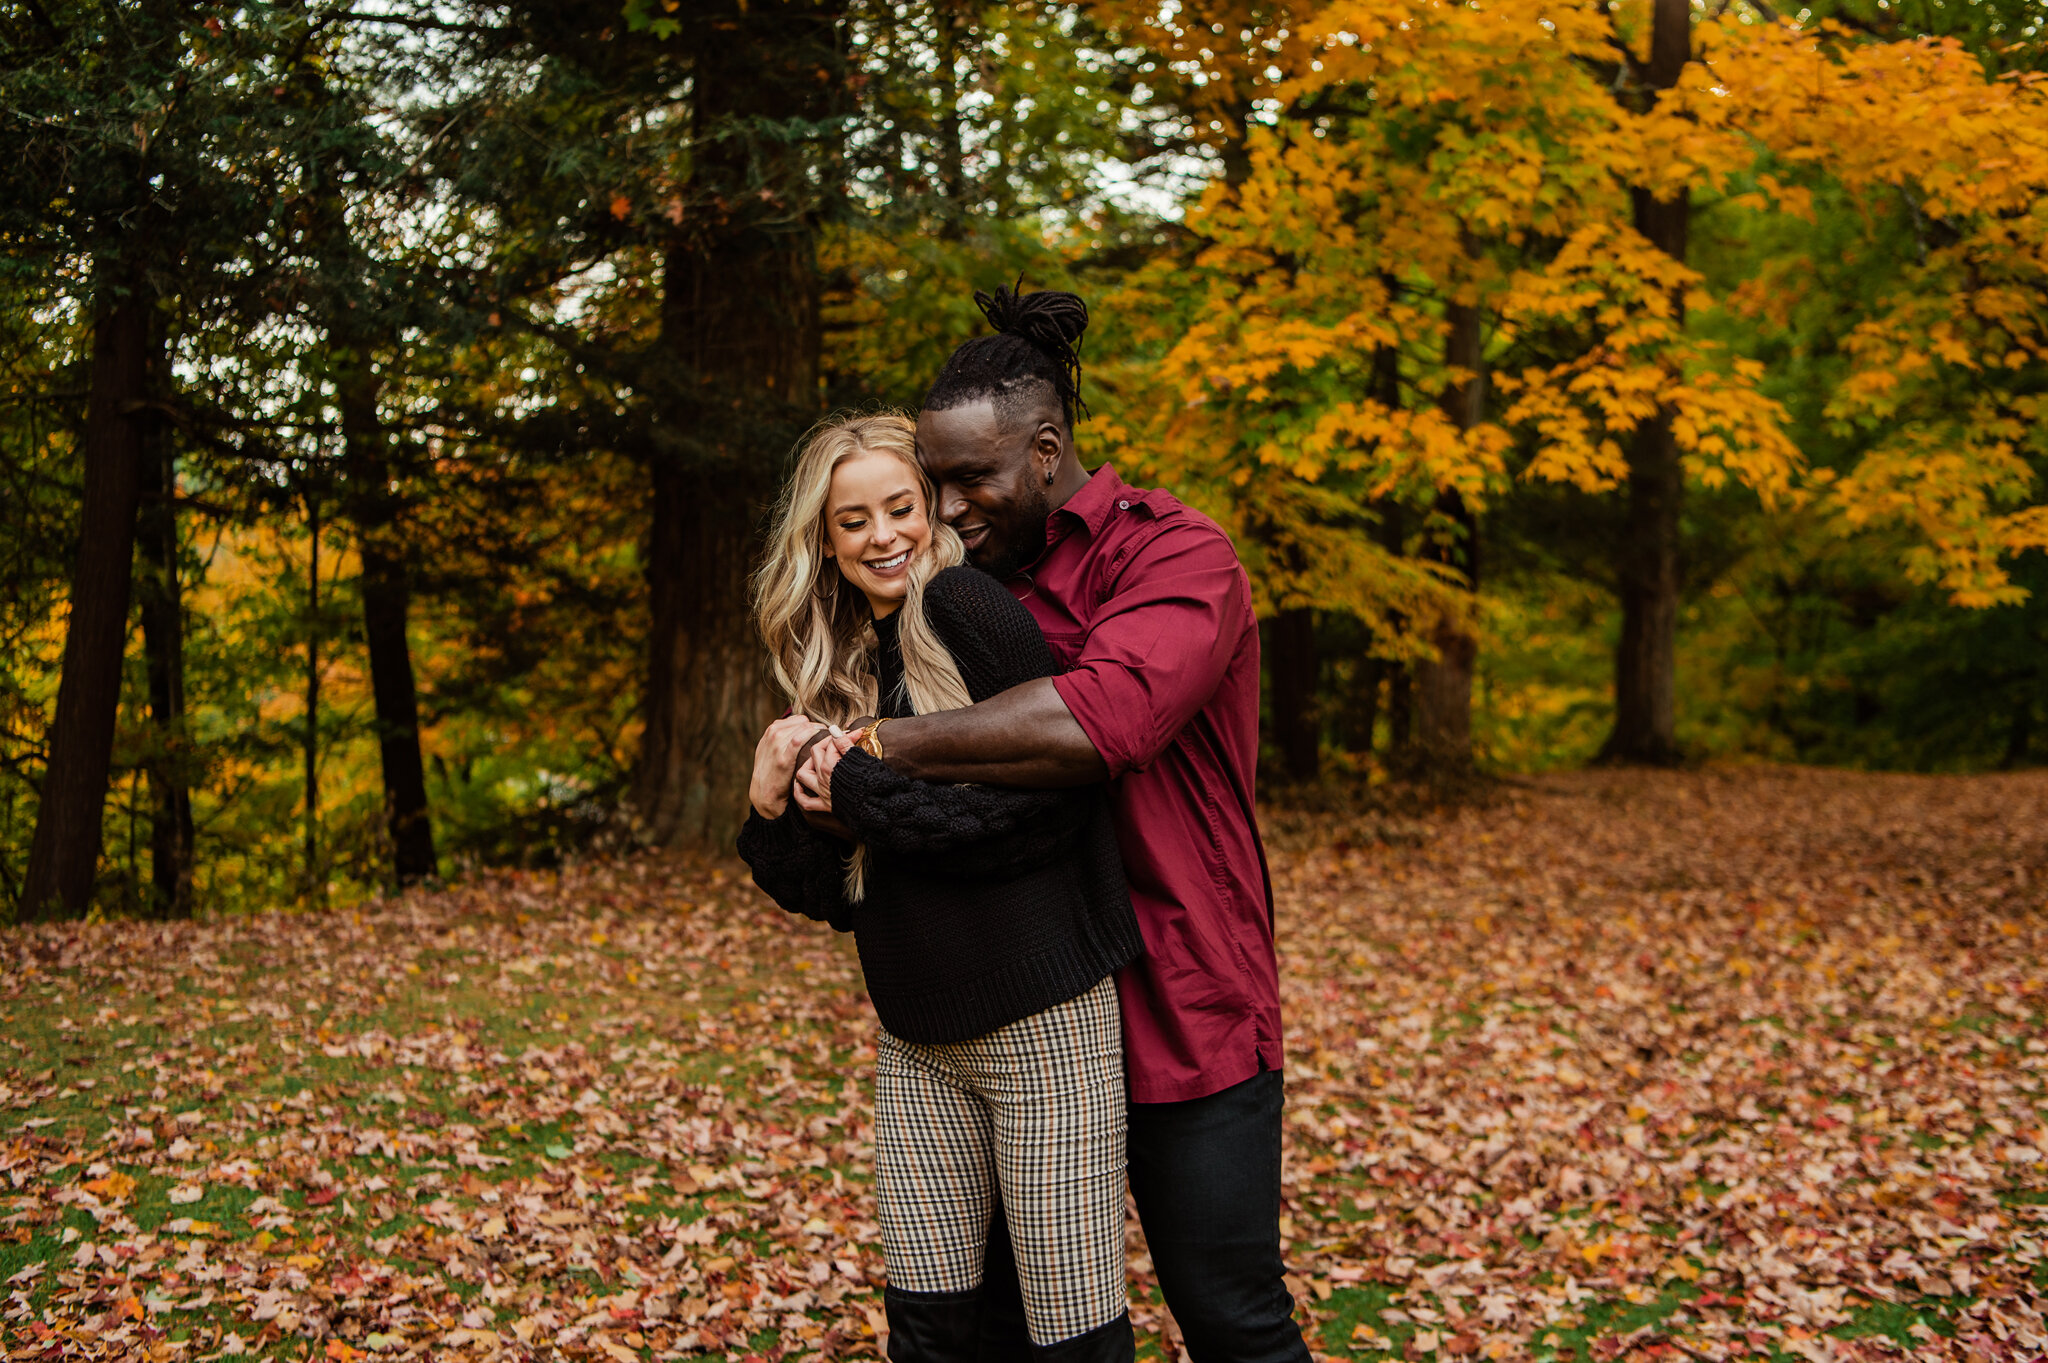 Letchworth_State_Park_Rochester_Couples_Session_JILL_STUDIO_Rochester_NY_Photographer_9278.jpg